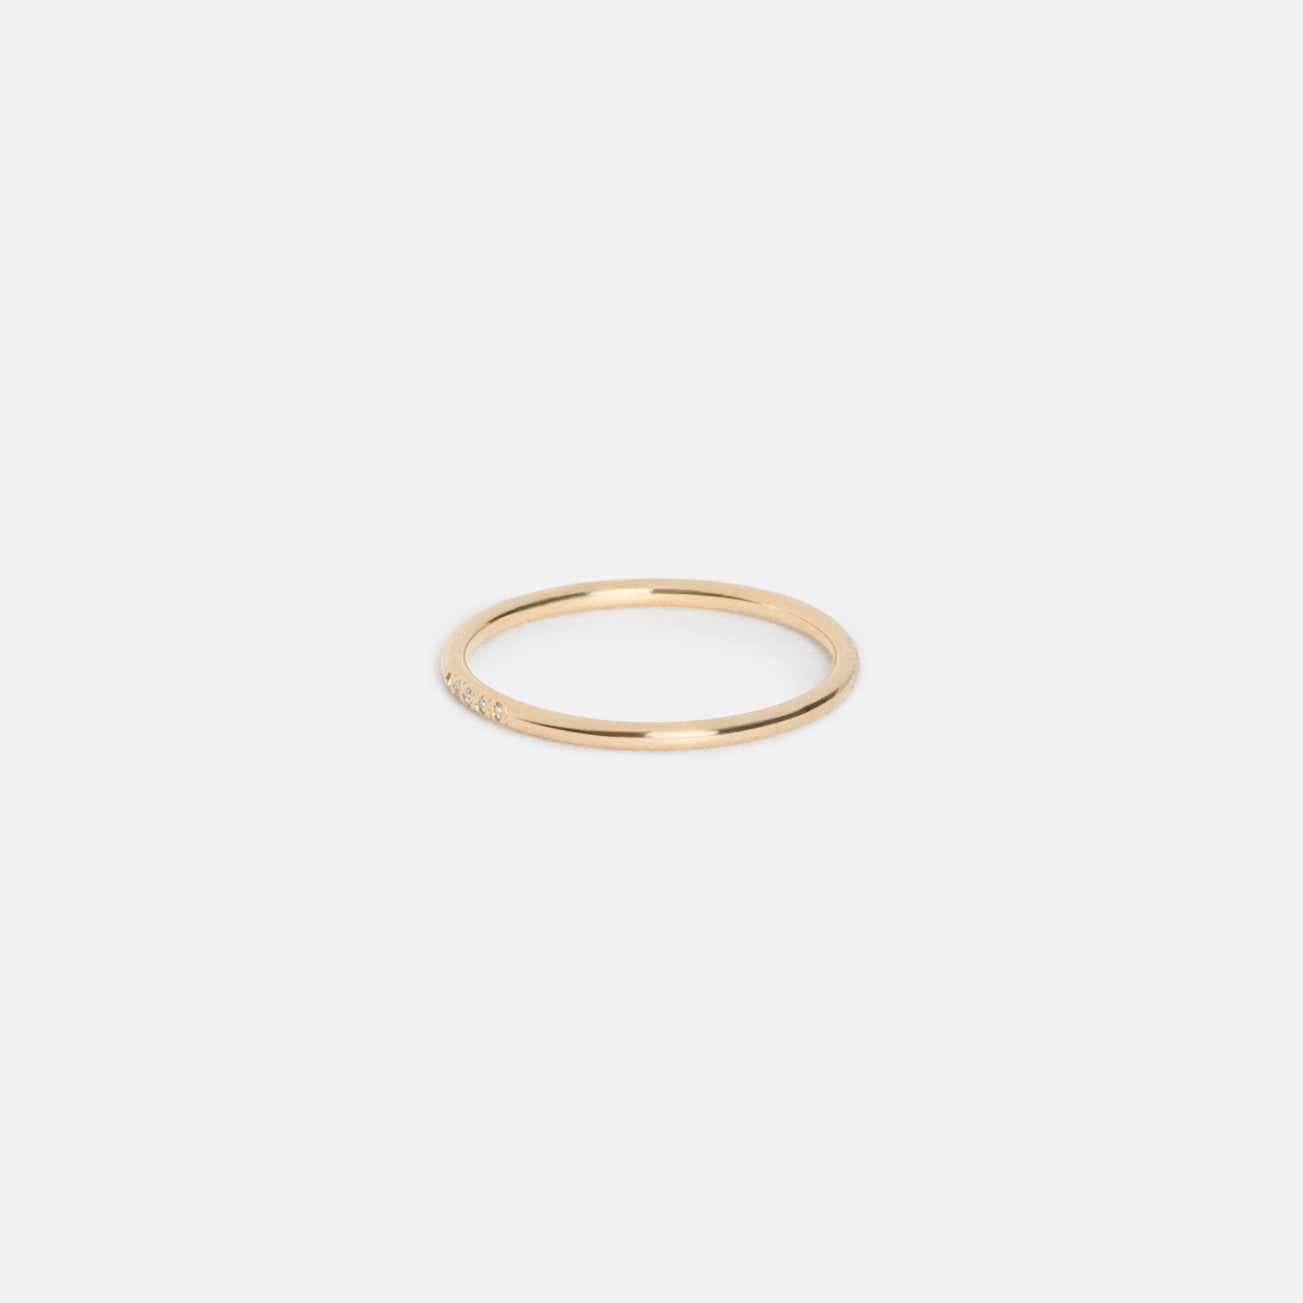 Eiga Minimal Ring in 14k Gold set with White Diamonds By SHW Fine Jewelry NYC